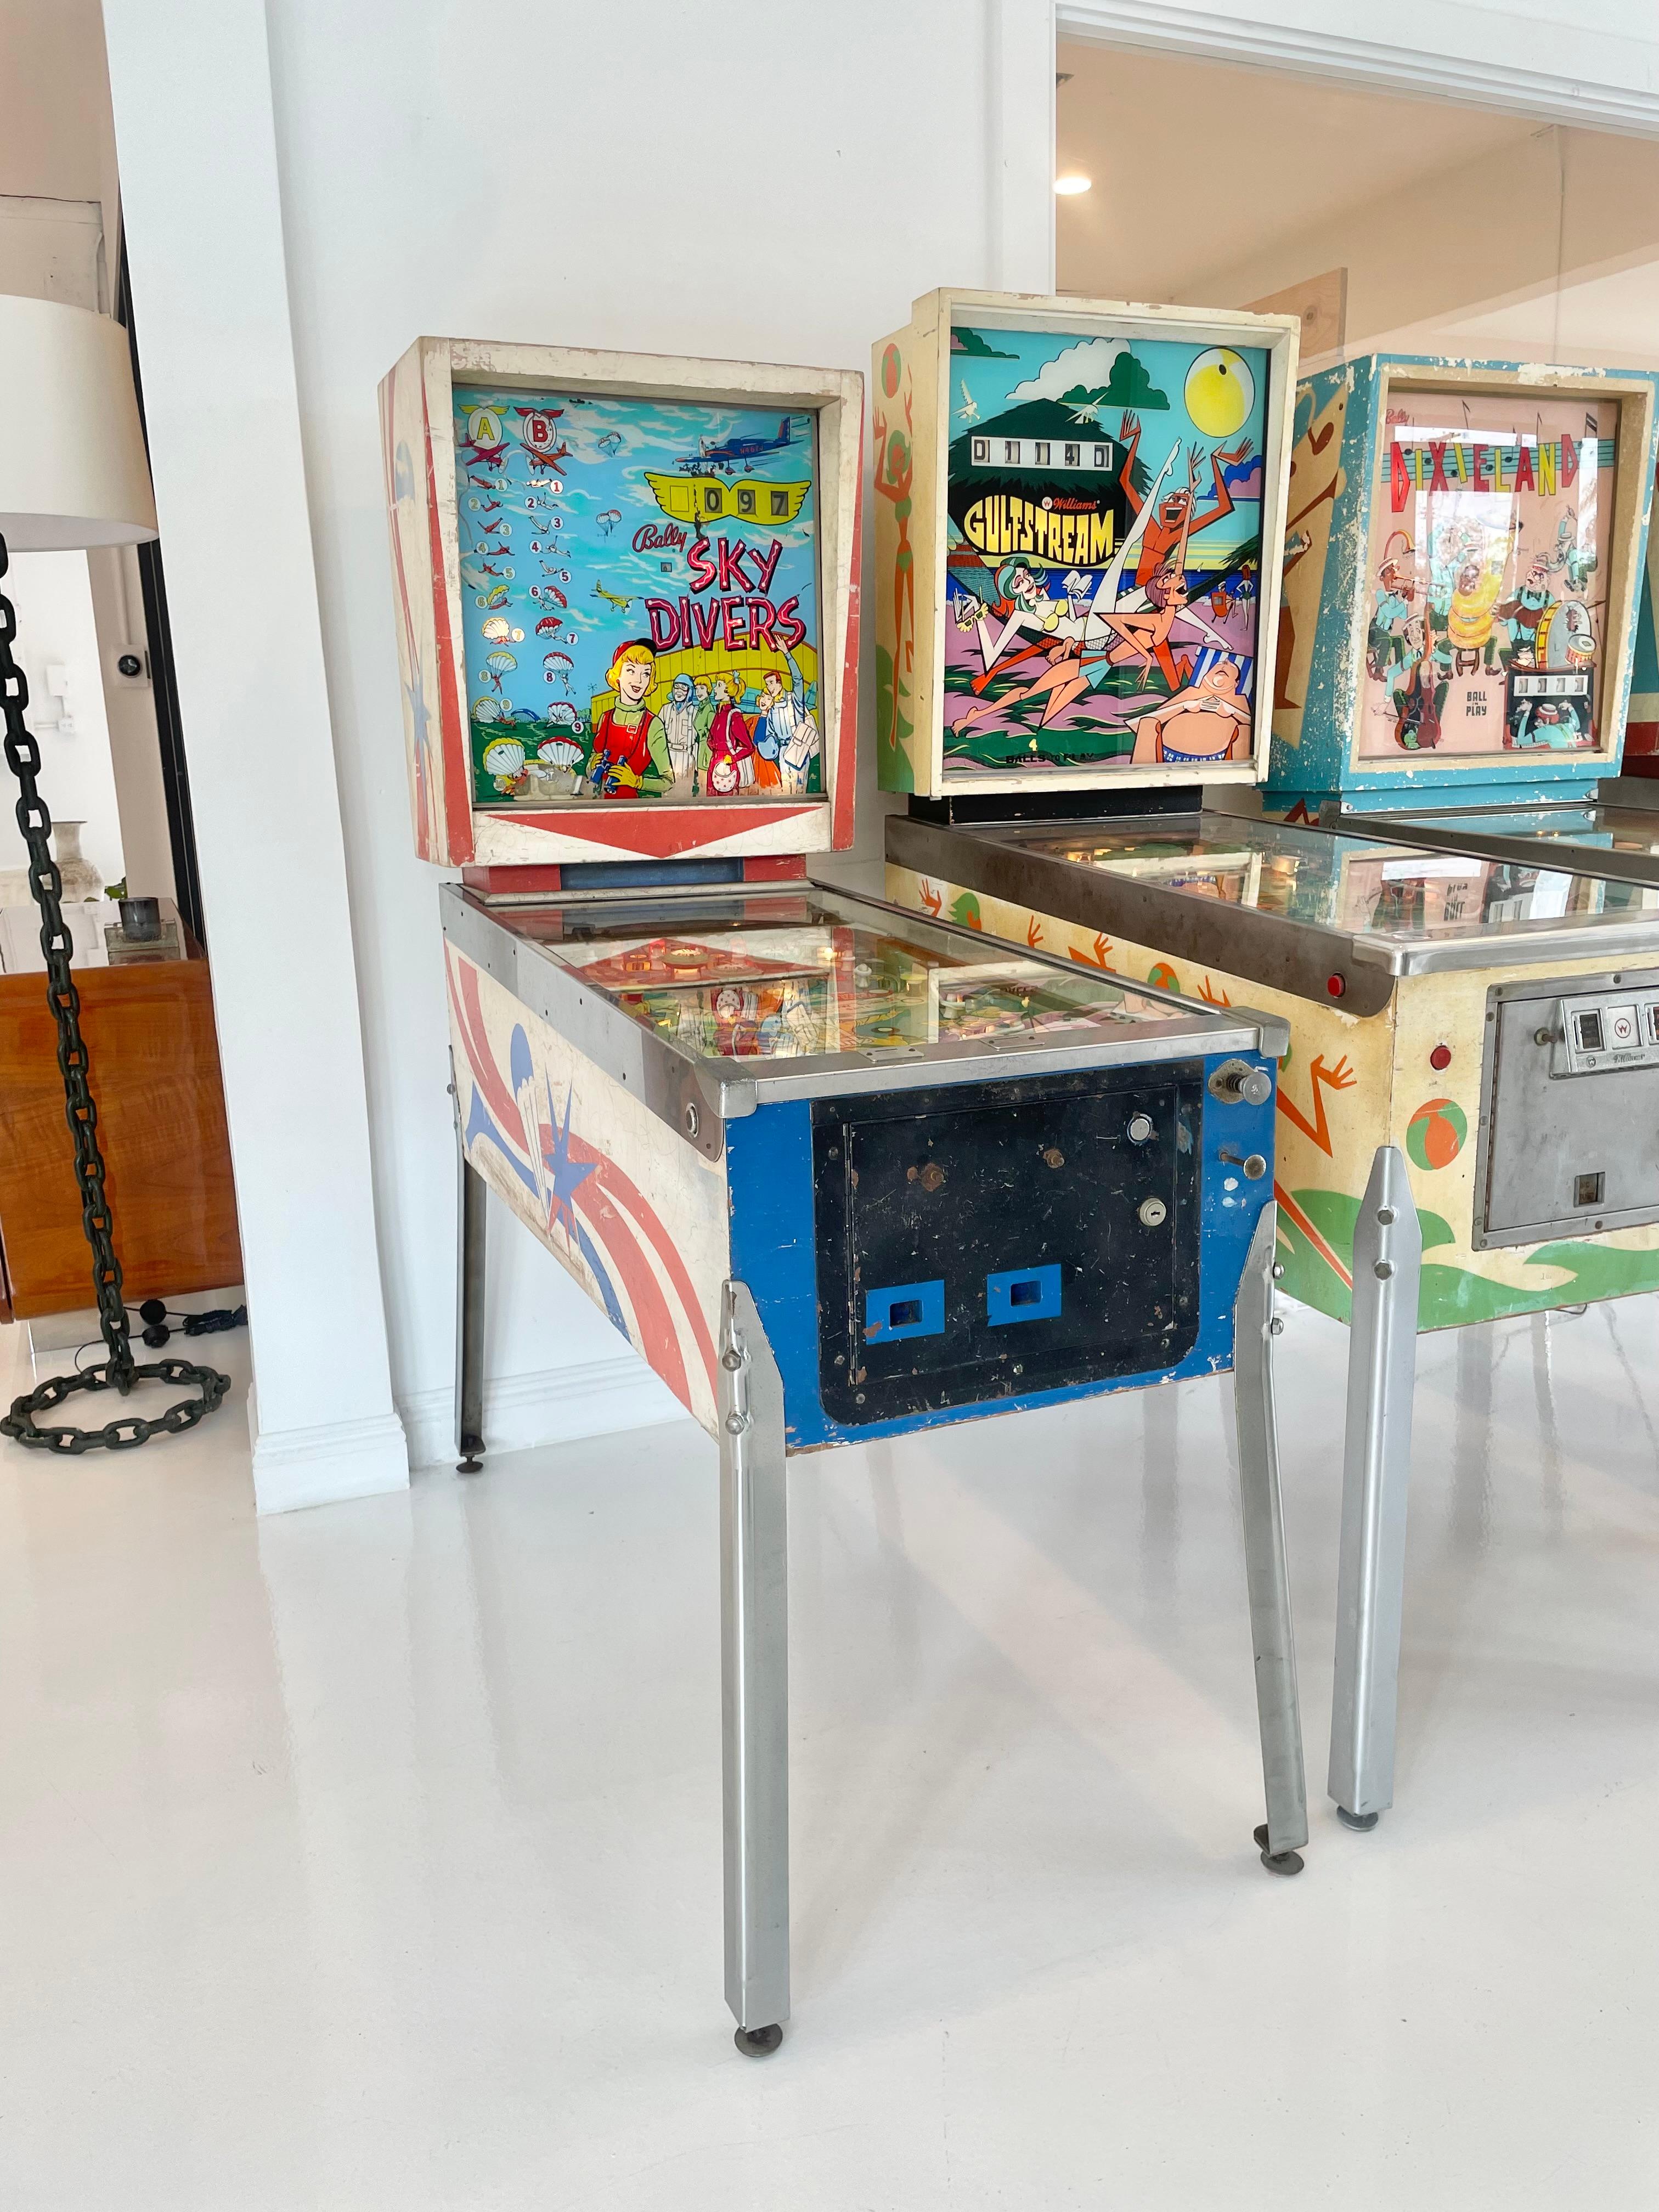 Vintage 'Sky Divers' pinball machine from 1964. Designed by Ted Zale and manufactured by Bally Manufacturing Co. Only 2,250 produced. In excellent working condition. Great visuals and sounds. Extremely fun paced gameplay. 

This game features